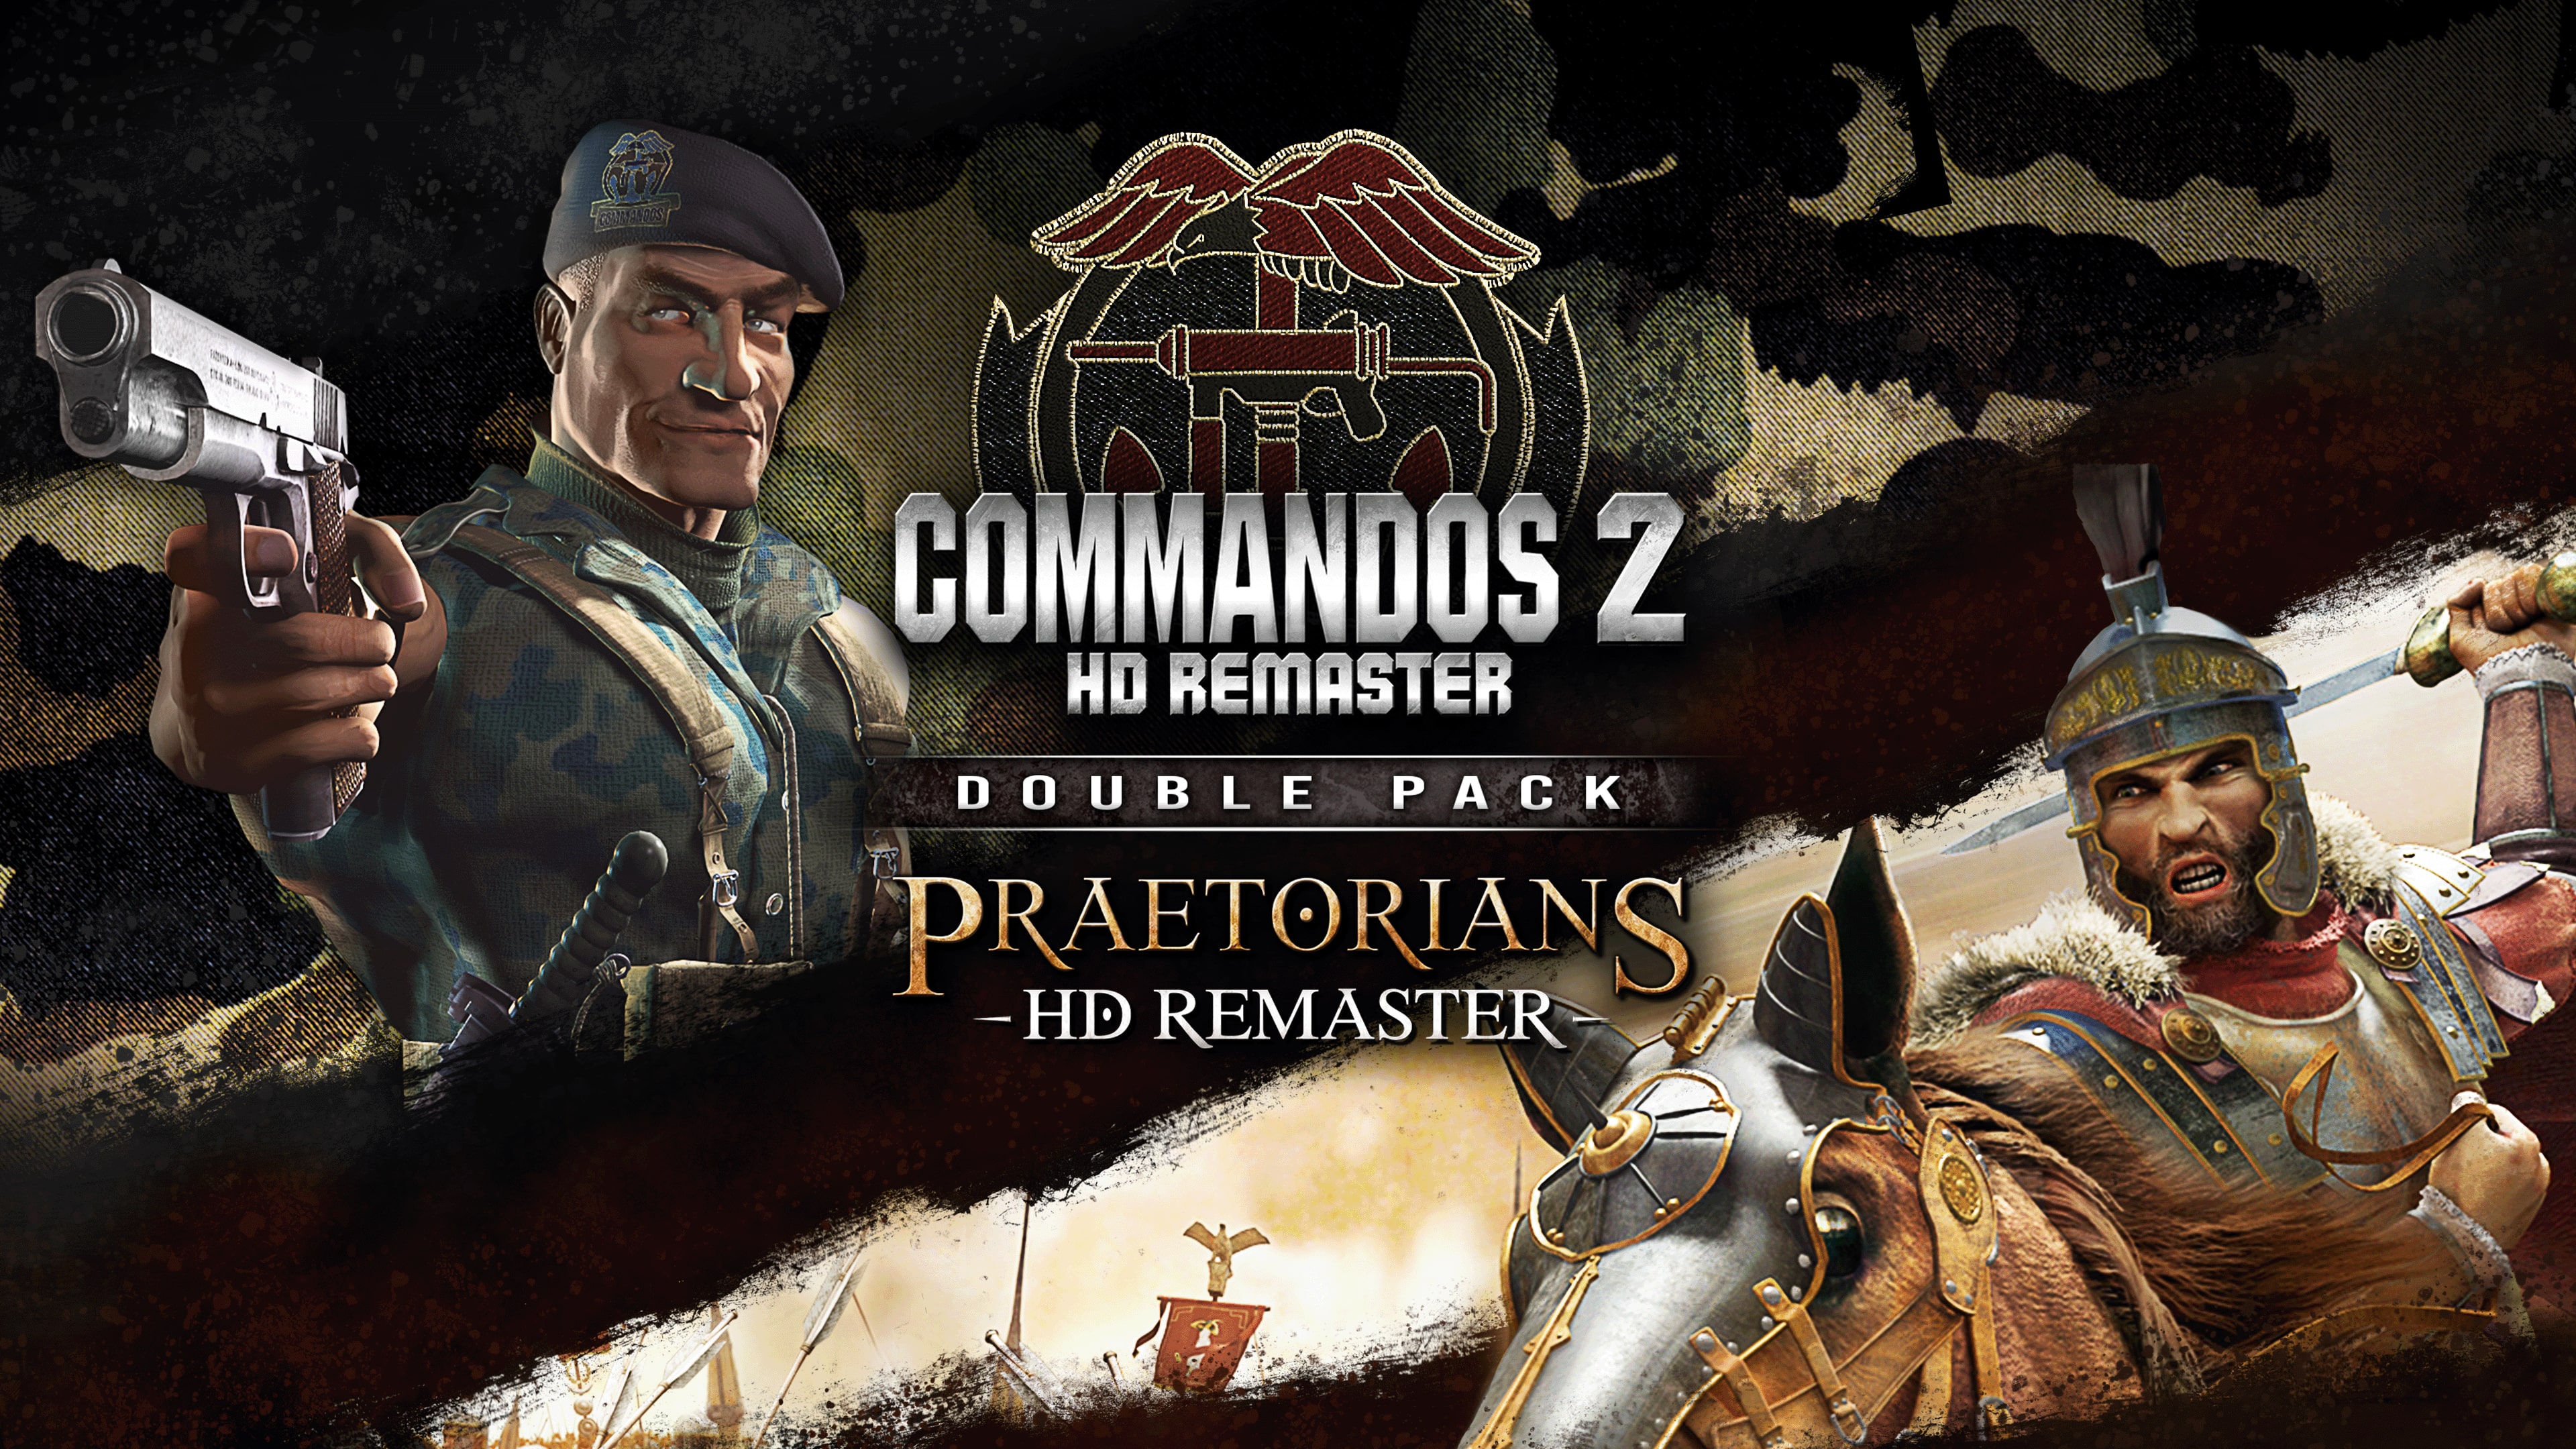 Commandos 2 & Praetorians: HD Remaster Double Pack (Simplified Chinese, English, Korean, Traditional Chinese)